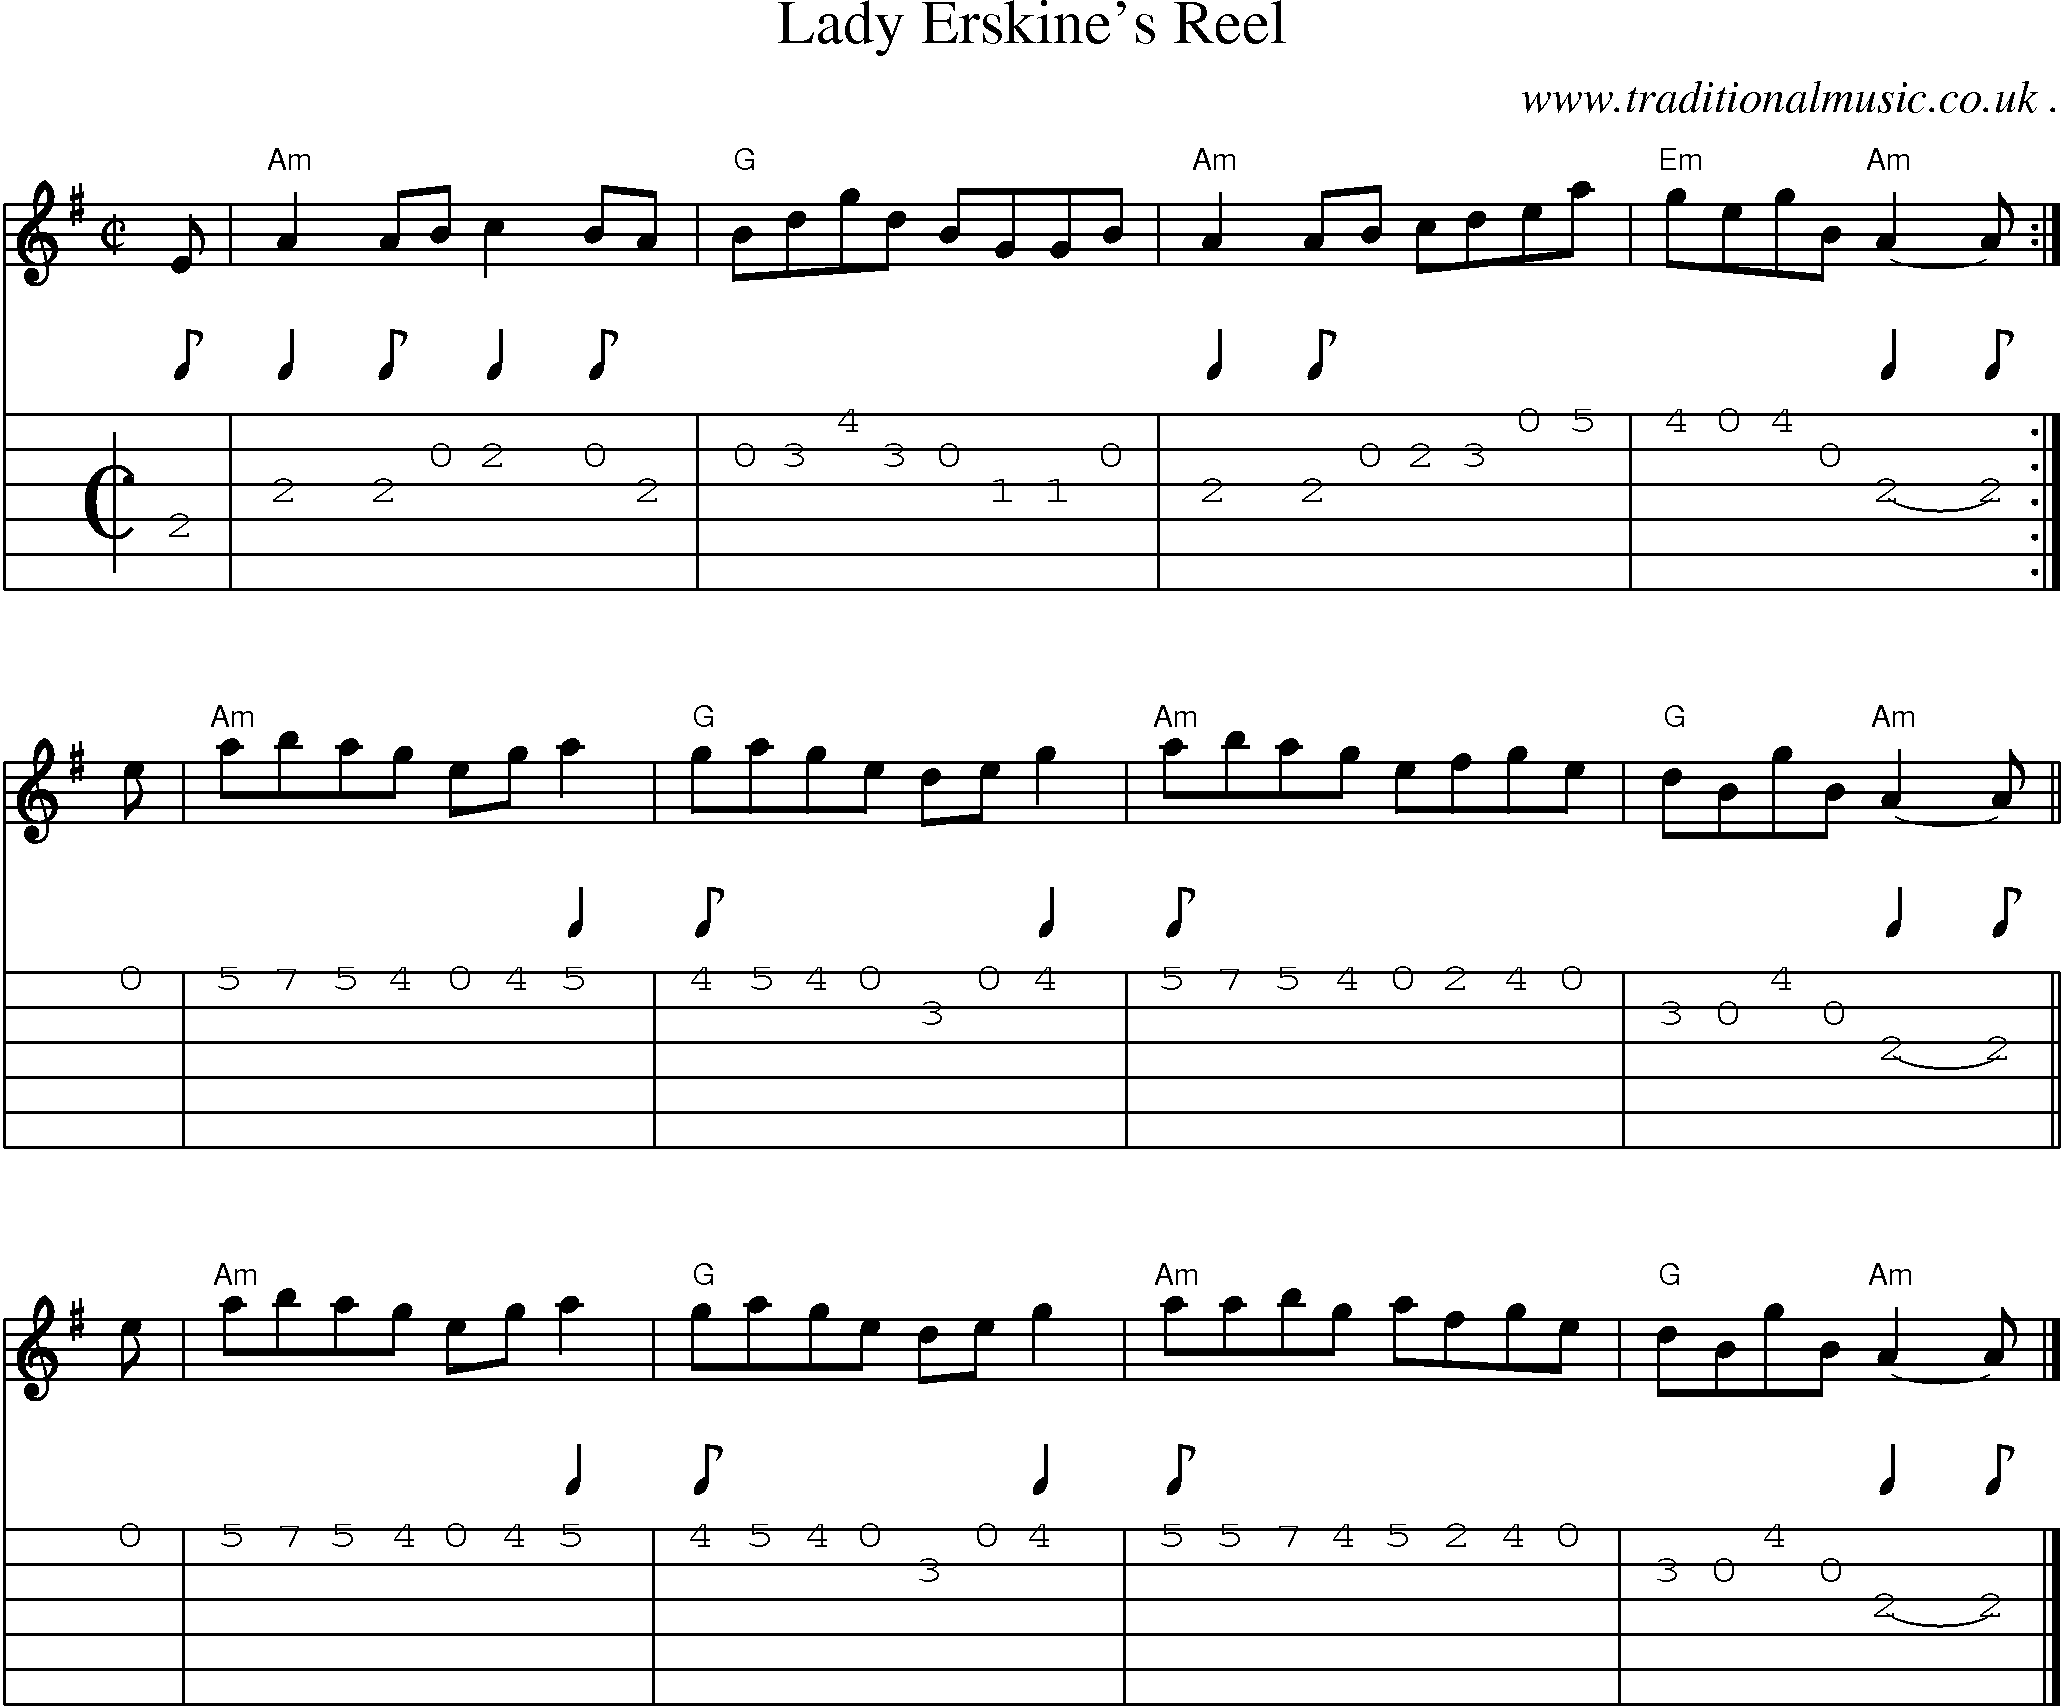 Sheet-music  score, Chords and Guitar Tabs for Lady Erskines Reel